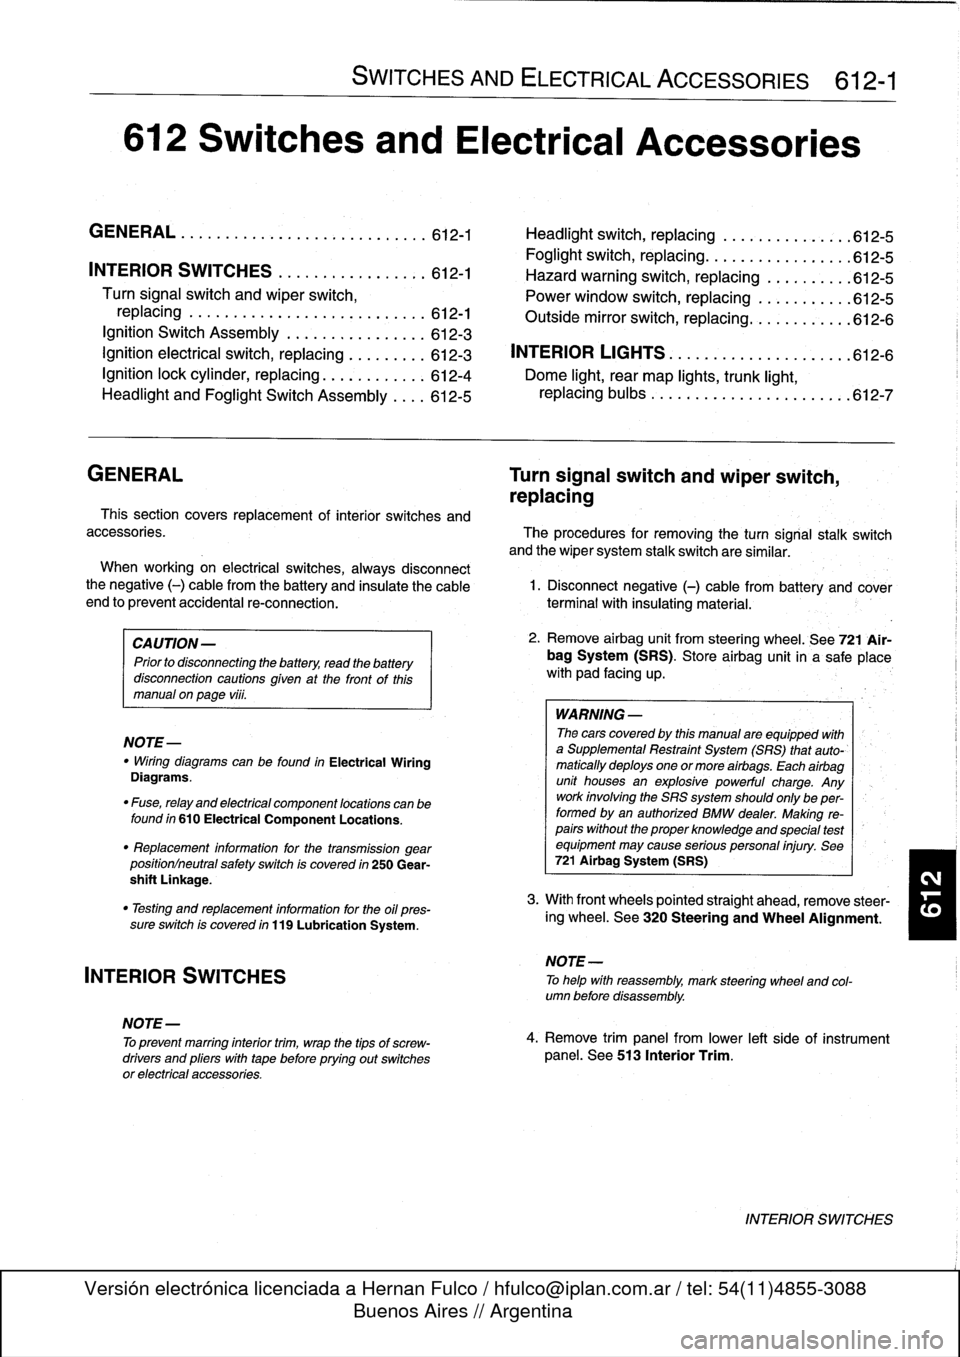 BMW 323i 1997 E36 Workshop Manual 
612
Switches
and
Electrical
Accessories

GENERAL
.
.
.
.
.
.
.
.
.
...
.
.
.
.
.
...
.
......
.612-1

	

Headlight
switch,
replacing

	

..
.
...
.
.
.
.
.
.
.
.
.
612-5

Foglight
switch,
replacing
.